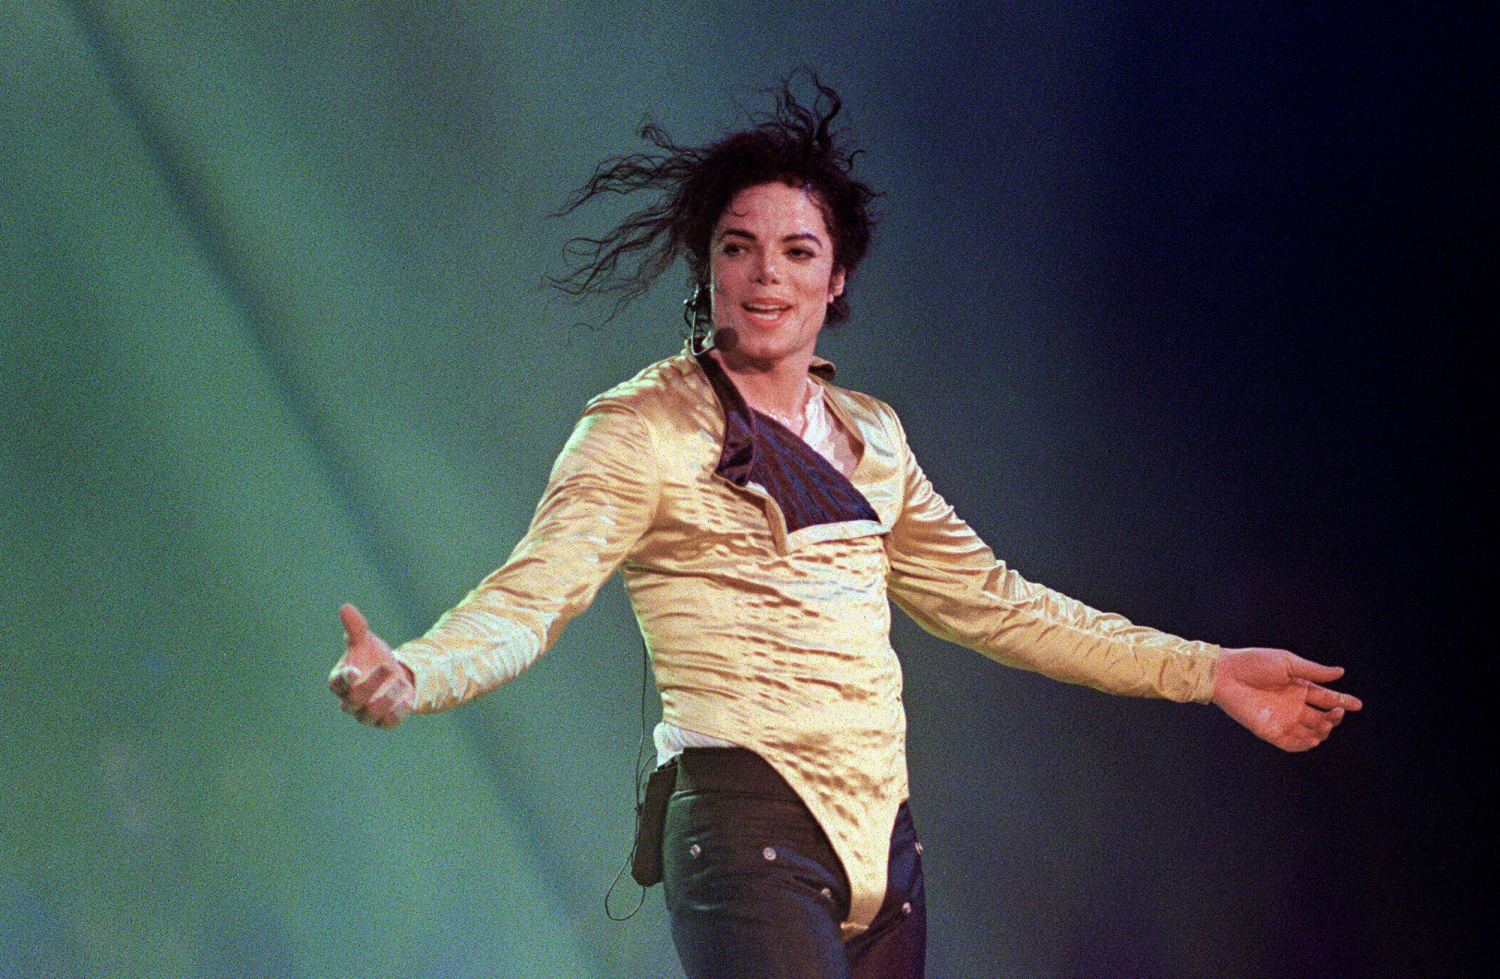 Michael Jackson estate wins appeal in lawsuit over HBO's 'Leaving Neverland'